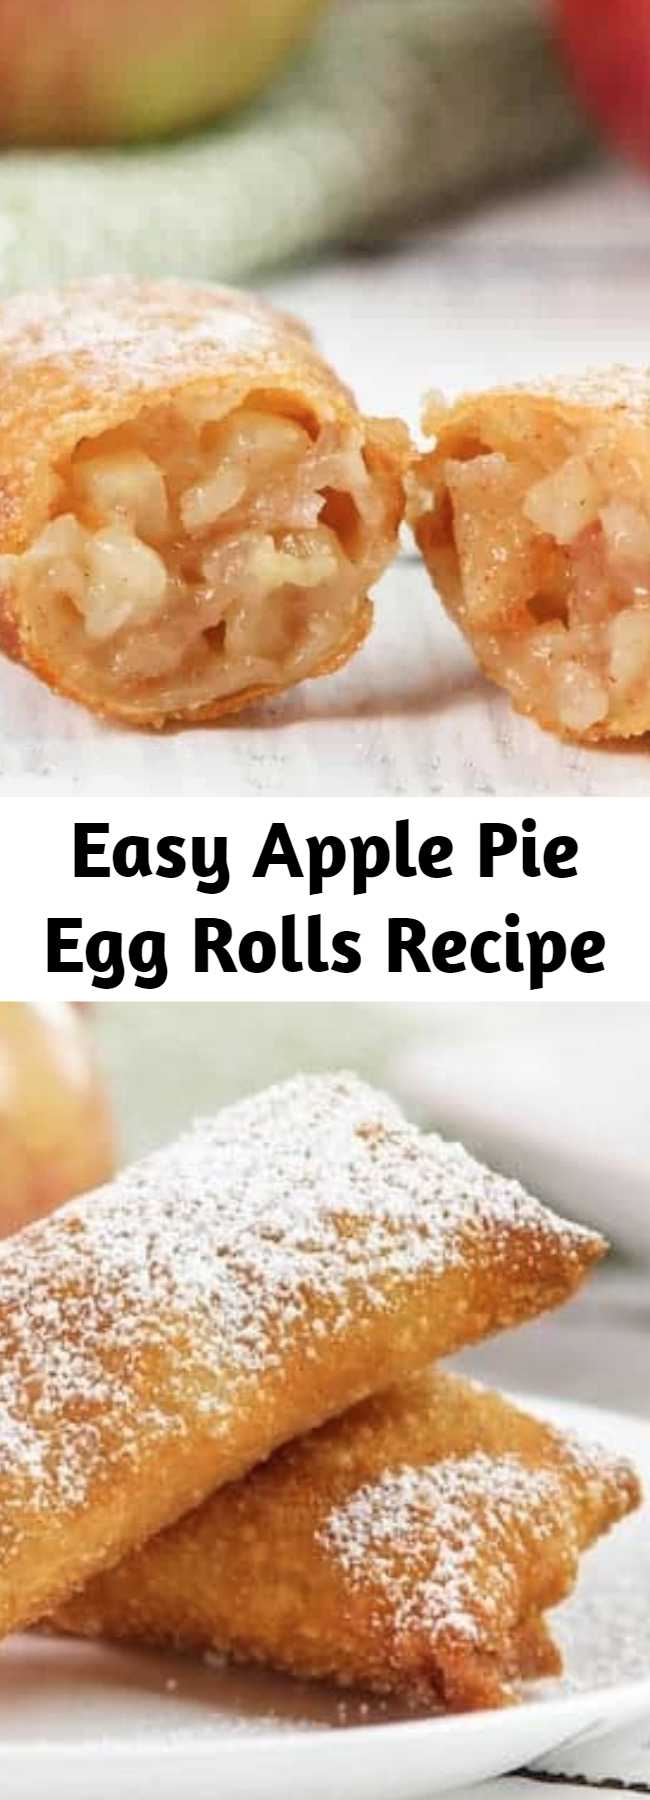 Easy Apple Pie Egg Rolls Recipe - These yummy little bundles are filled with a simple homemade cinnamon apple filling, deep fried golden brown and kissed with cinnamon.